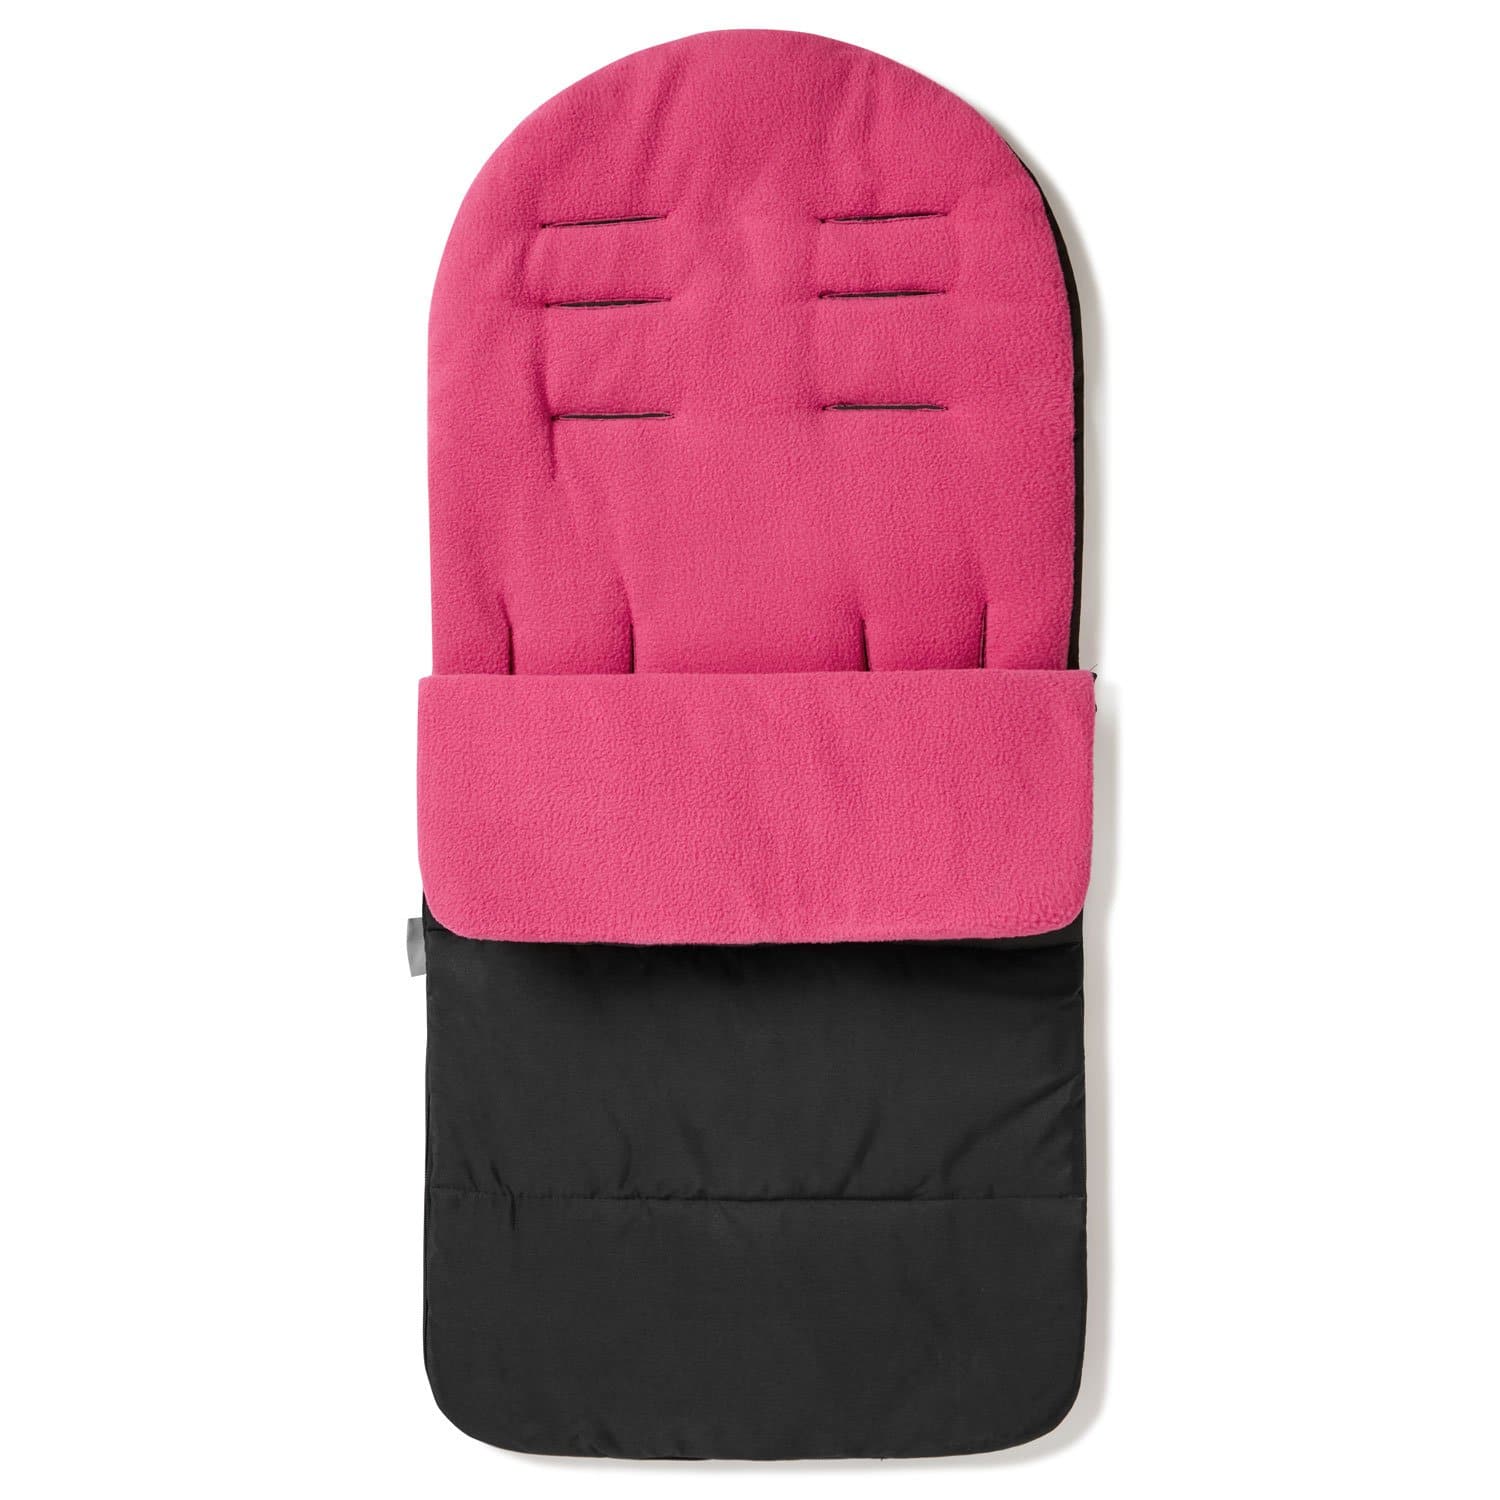 Premium Footmuff / Cosy Toes Compatible with Britax - Pink Rose / Fits All Models | For Your Little One